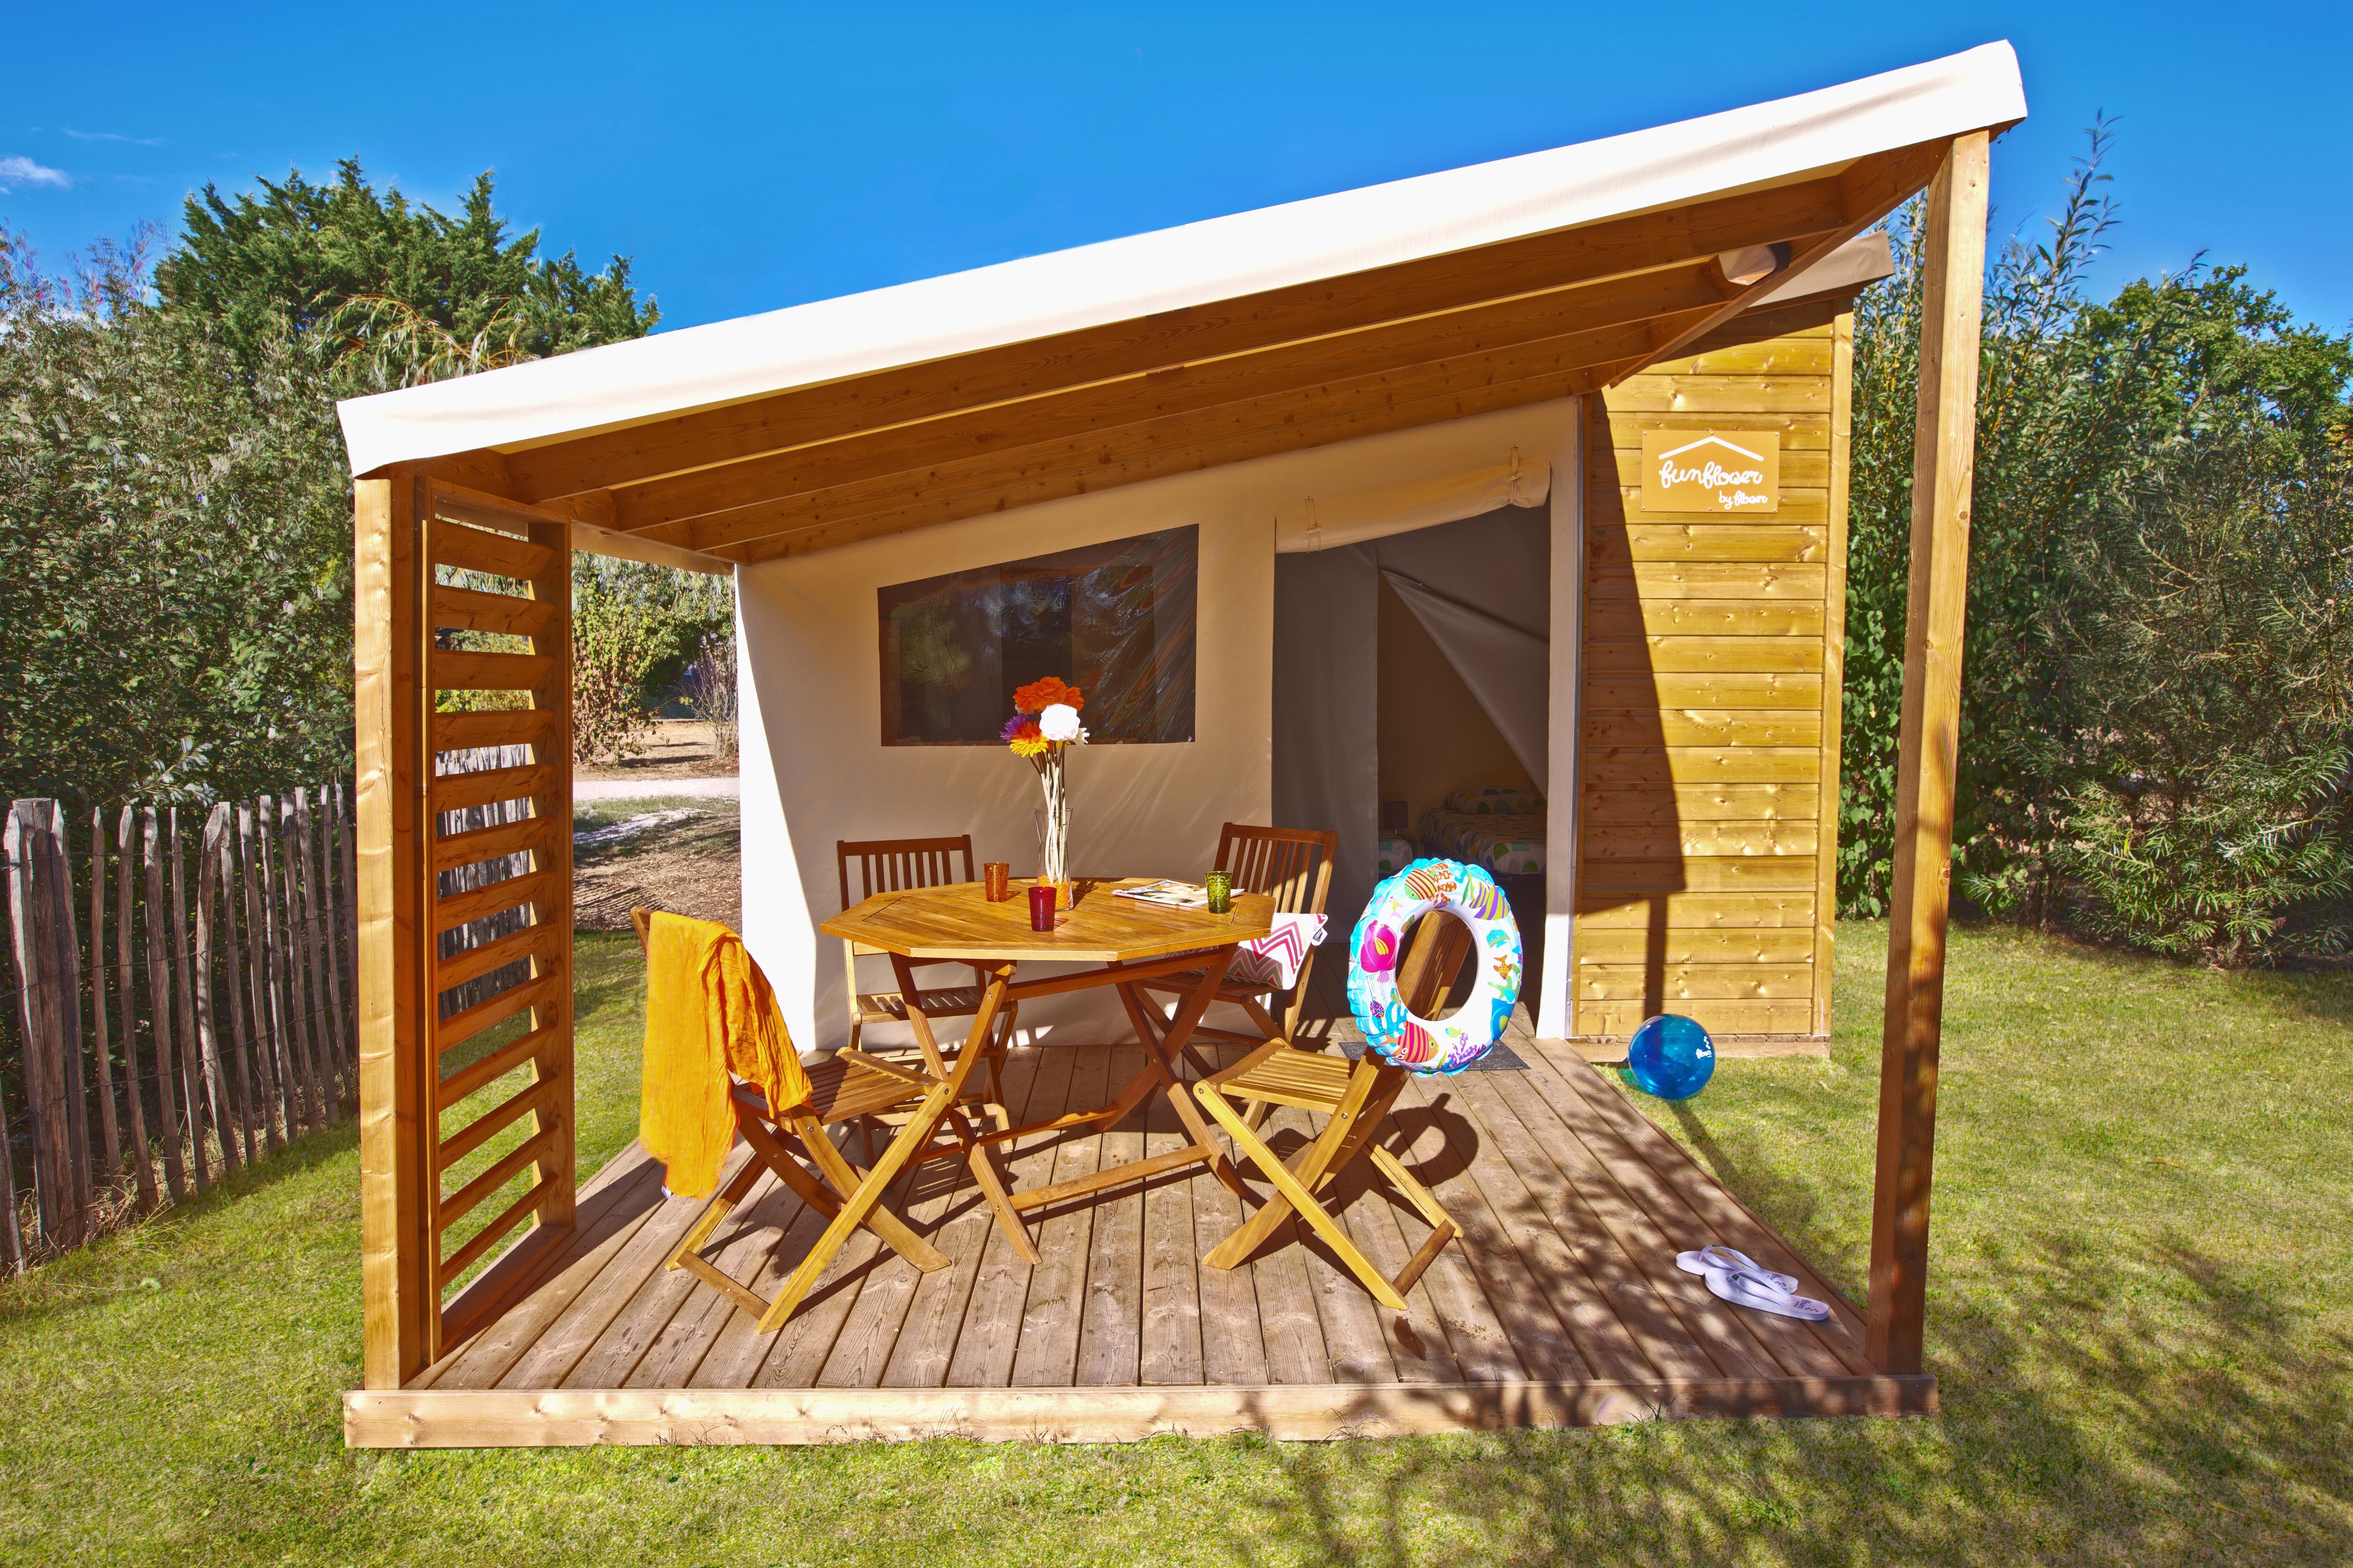 Accommodation - Funflower Standard  20M² / 2 Bedrooms - Terrace (Without Toilet Blocks) - Flower Camping Beauchêne